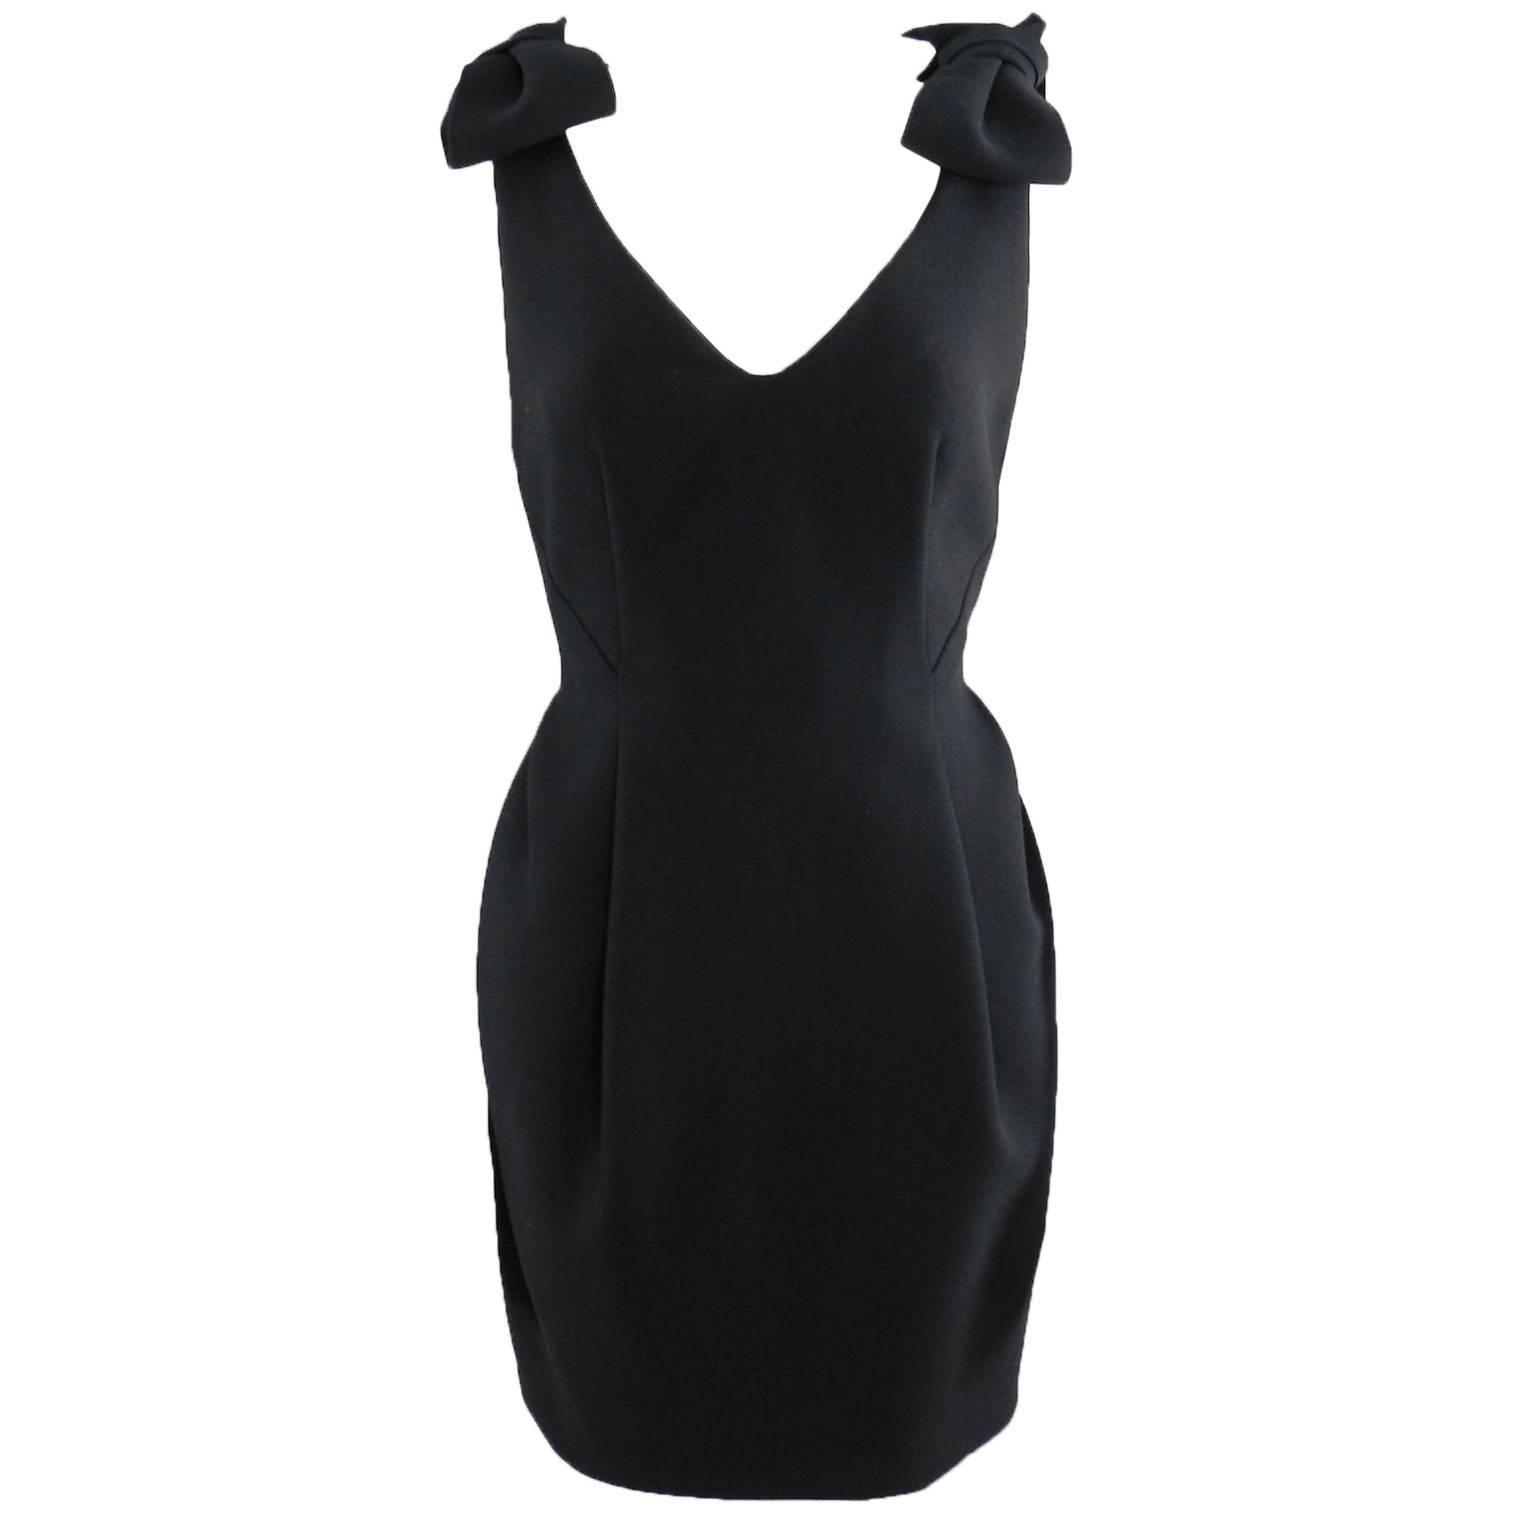 Lanvin Black Cocktail Dress with Bows at Shoulders